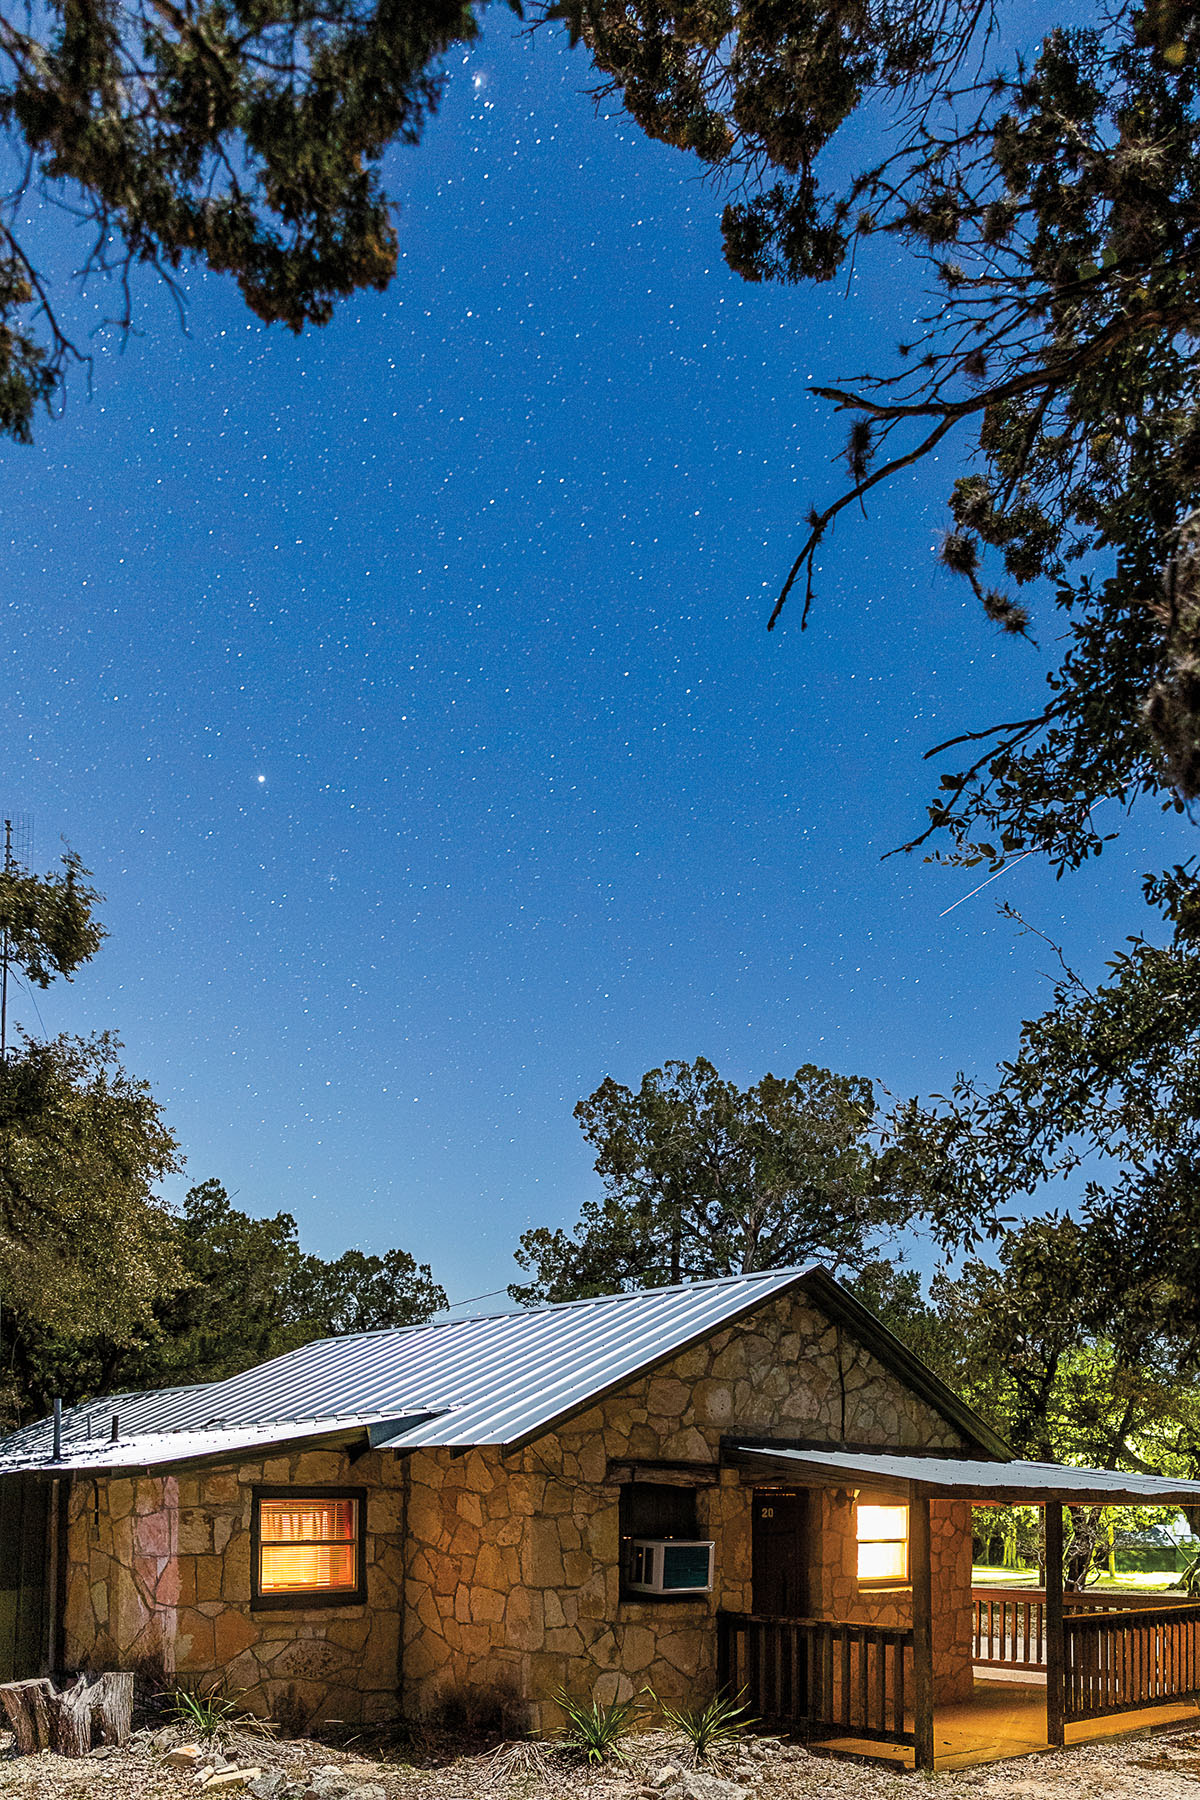 The exterior of a small cabin under a deep blue and starry sky